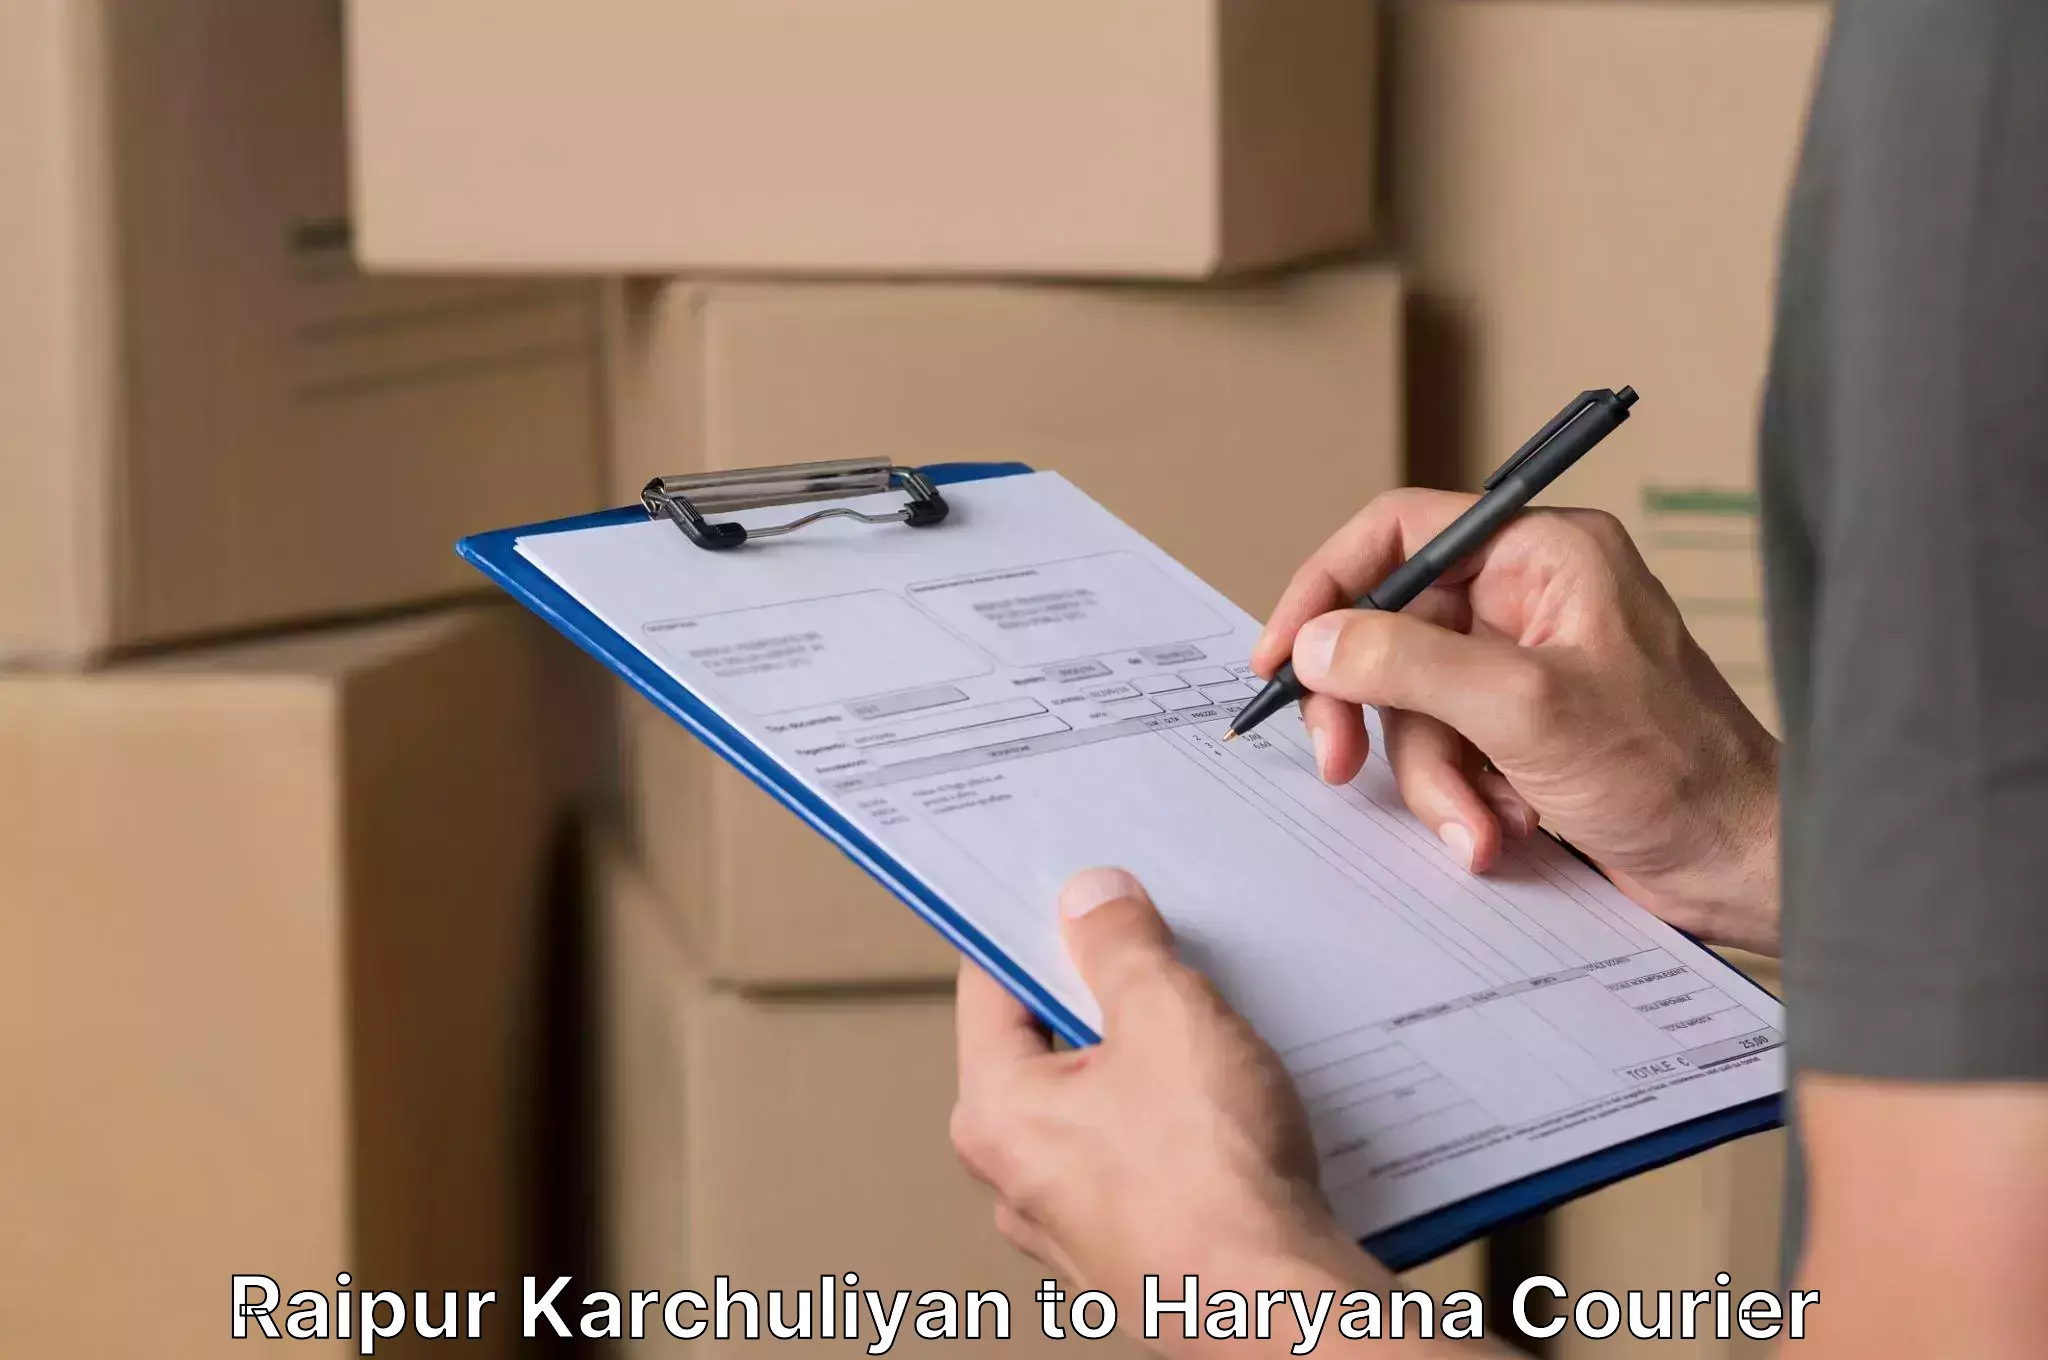 Quality relocation services Raipur Karchuliyan to Dharuhera